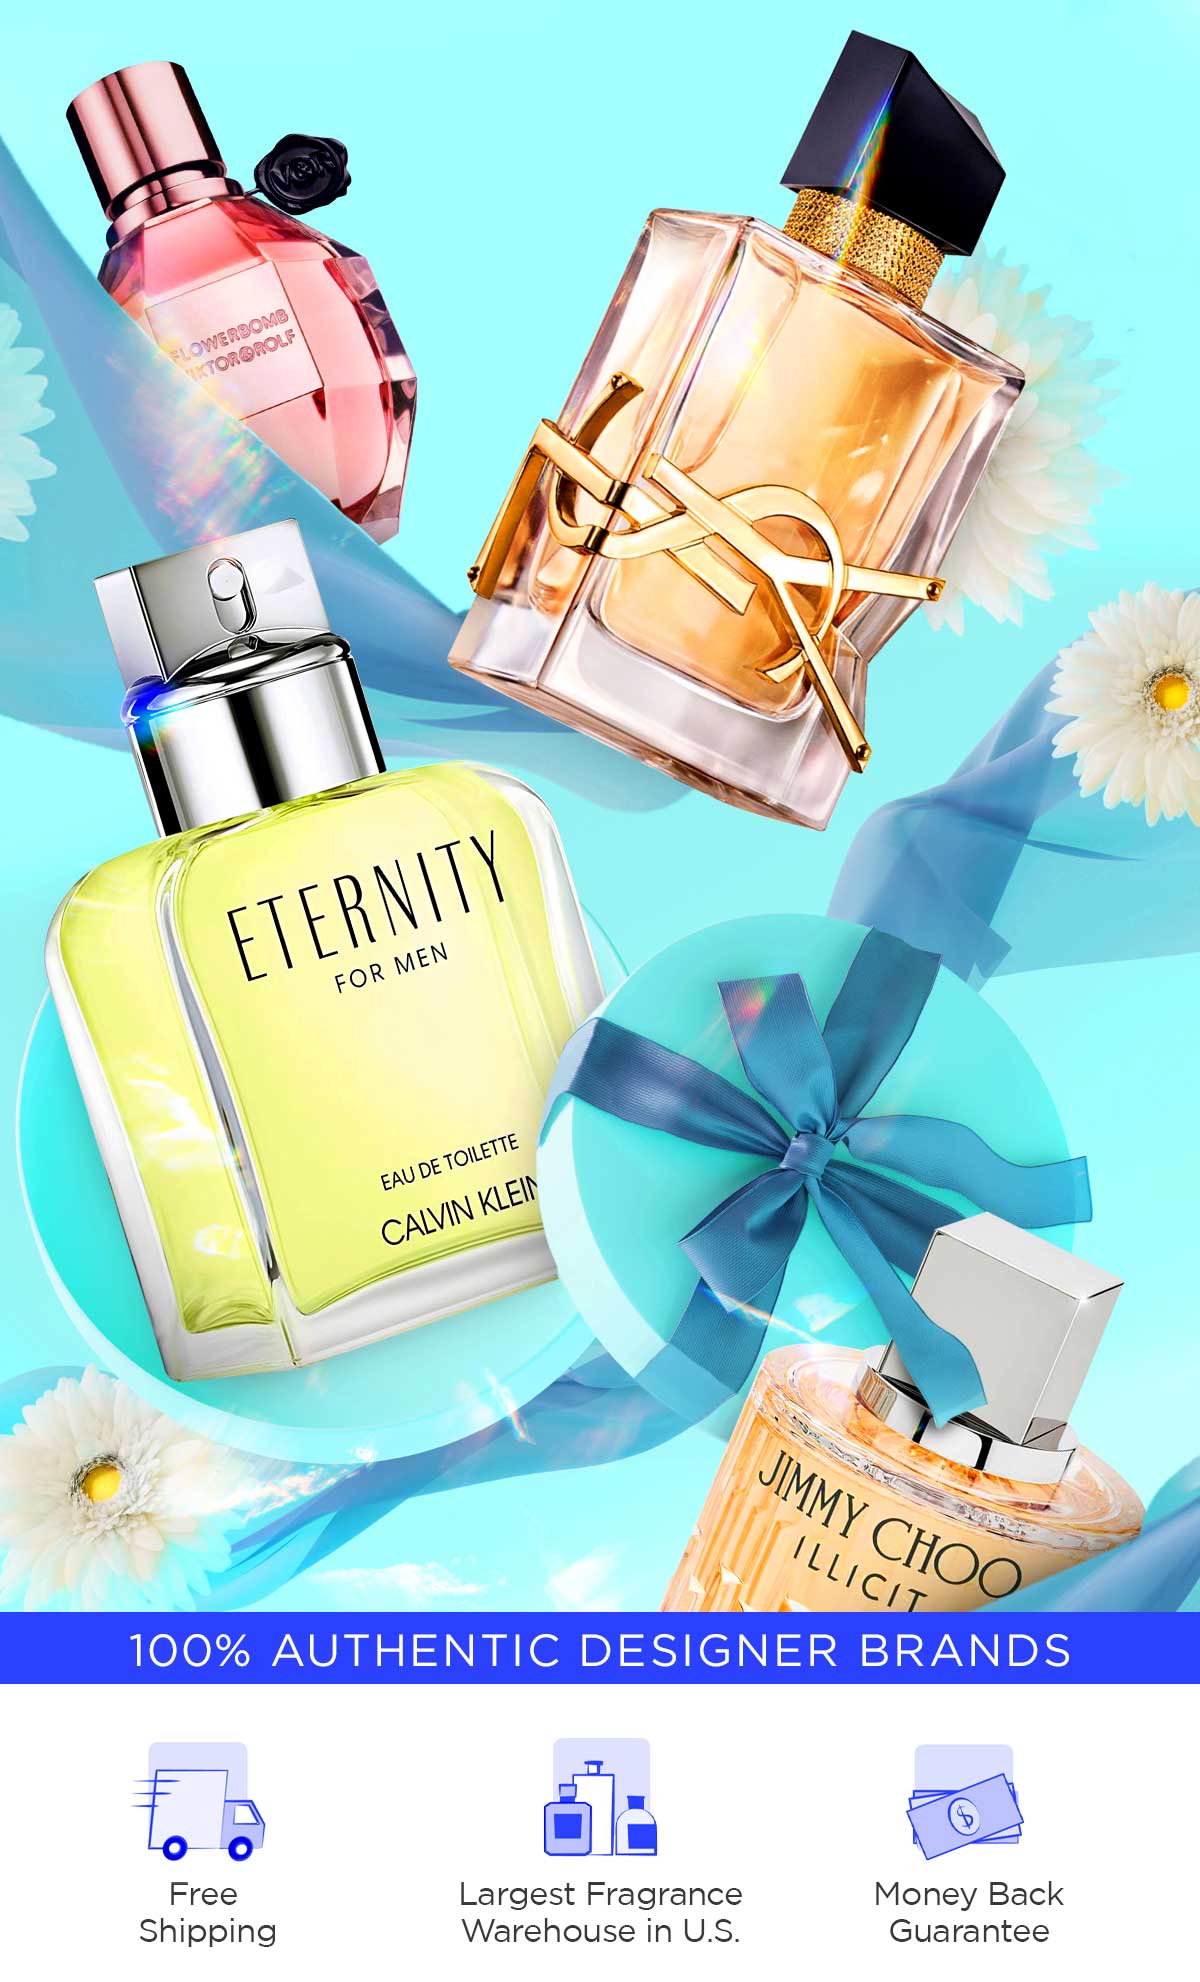 Ribbons and daisies surround popular fragrances on sale for spring